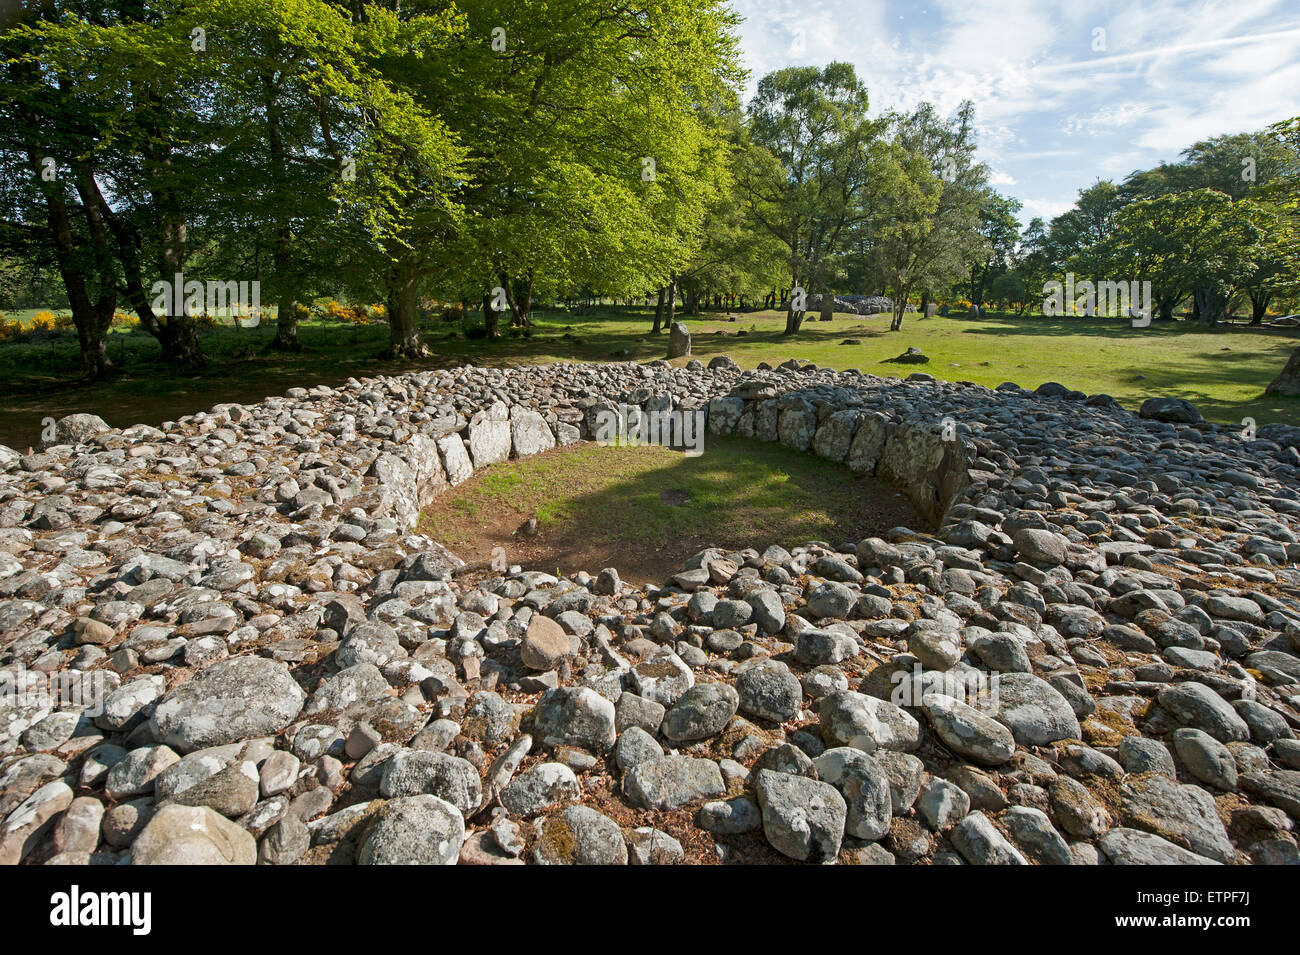 The prehistoric Neolithic burial site at the Balnuran Clava Cairns, near Culloden, Inverness-shire.  SCO 9874 Stock Photo